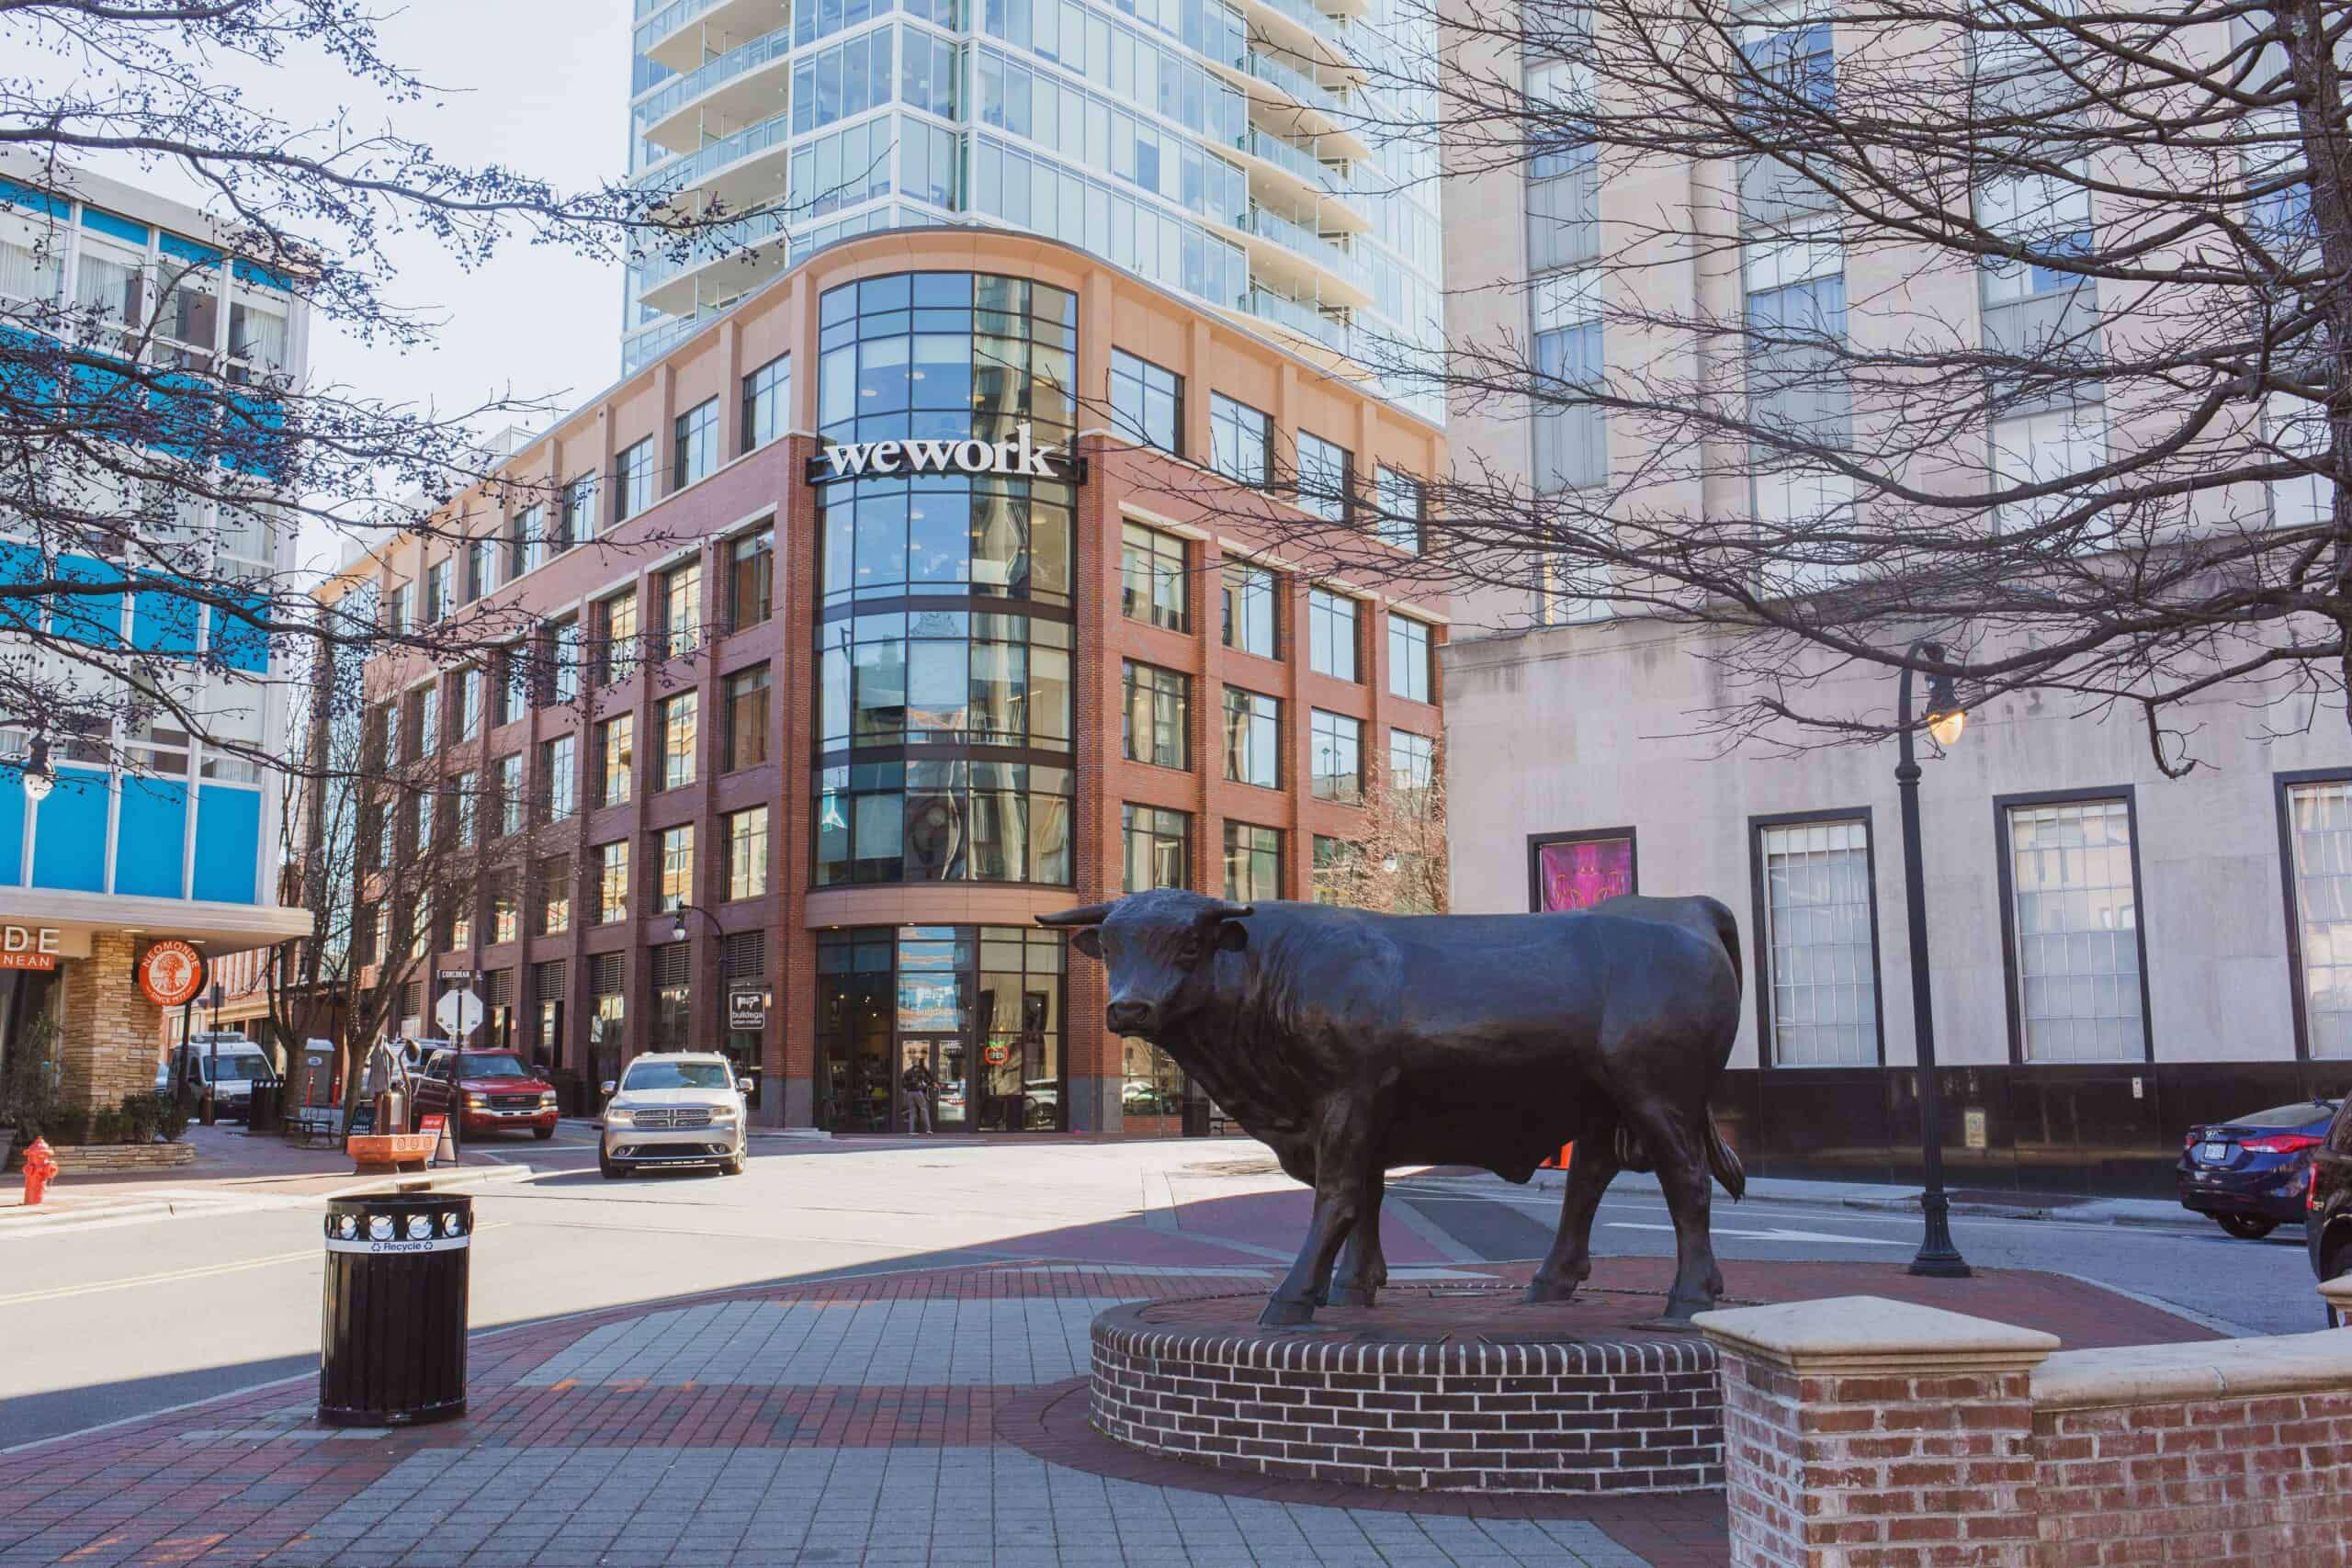 colin-rowley-downtown durham CCB Plaza with Bull looking at We Work Building and 21 c Hotel-unsplash (1)